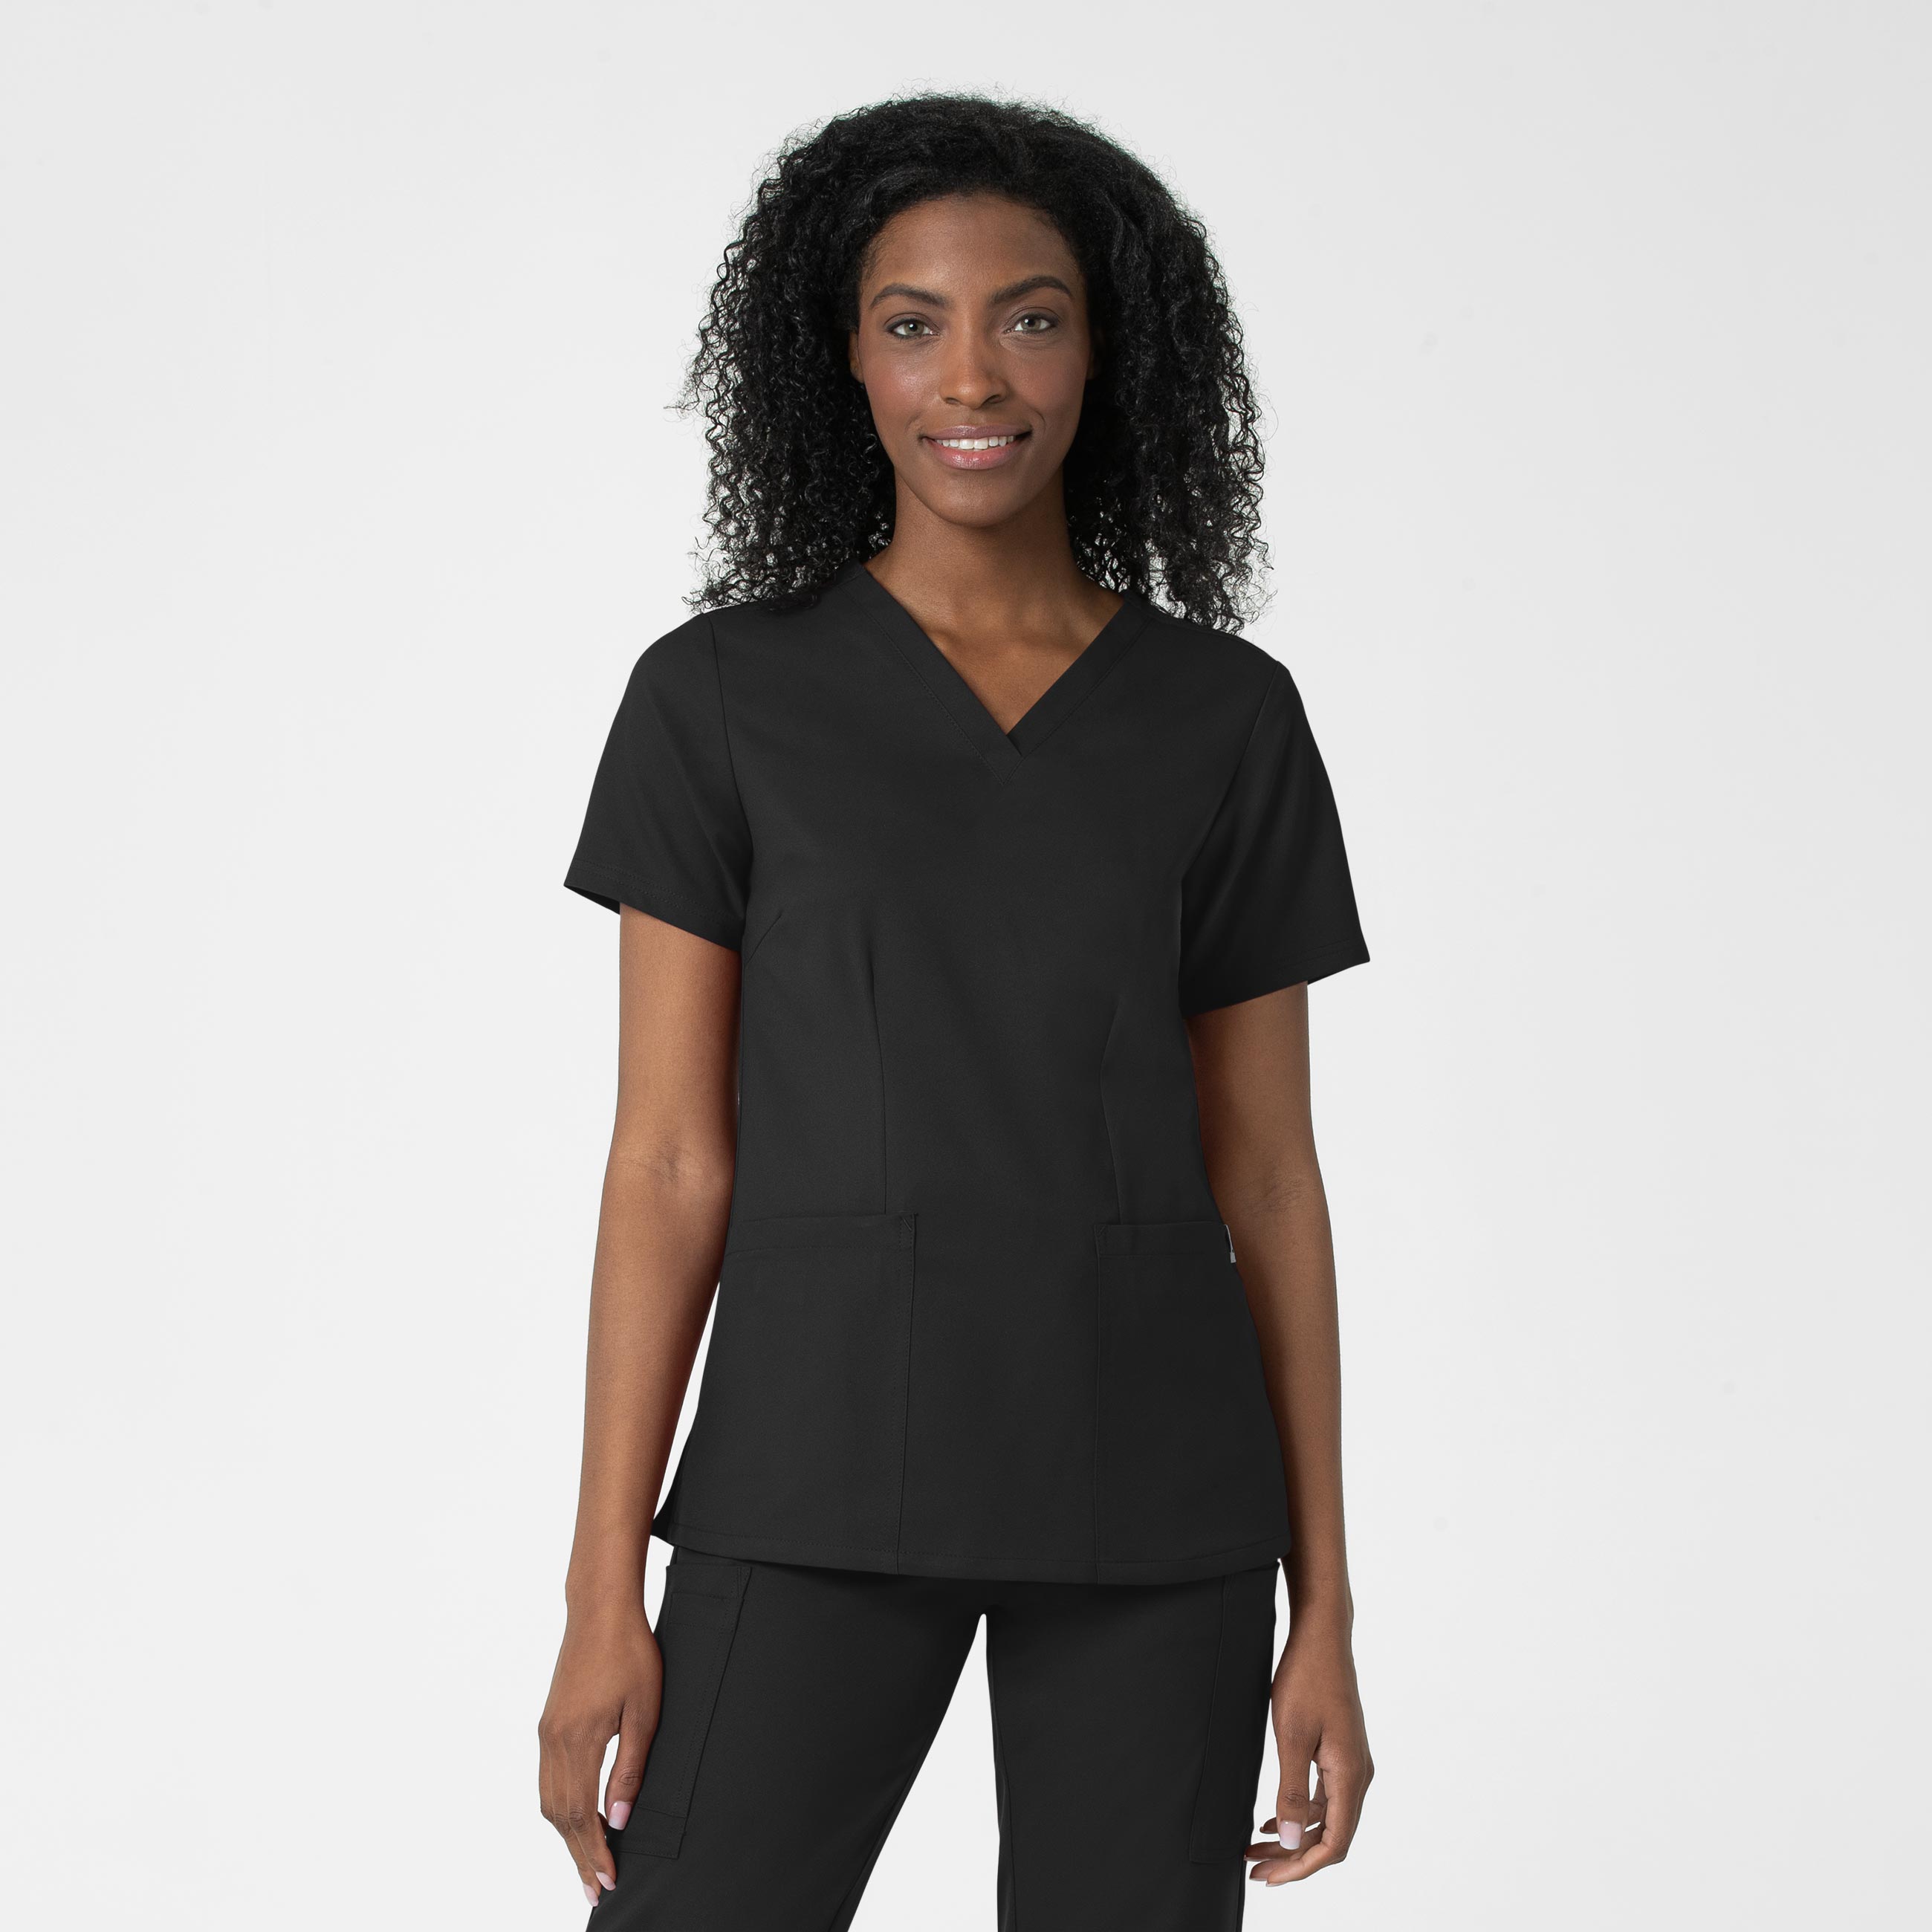 Wink Thrive Womens Fitted 3-Pocket V-Neck Scrub Top-